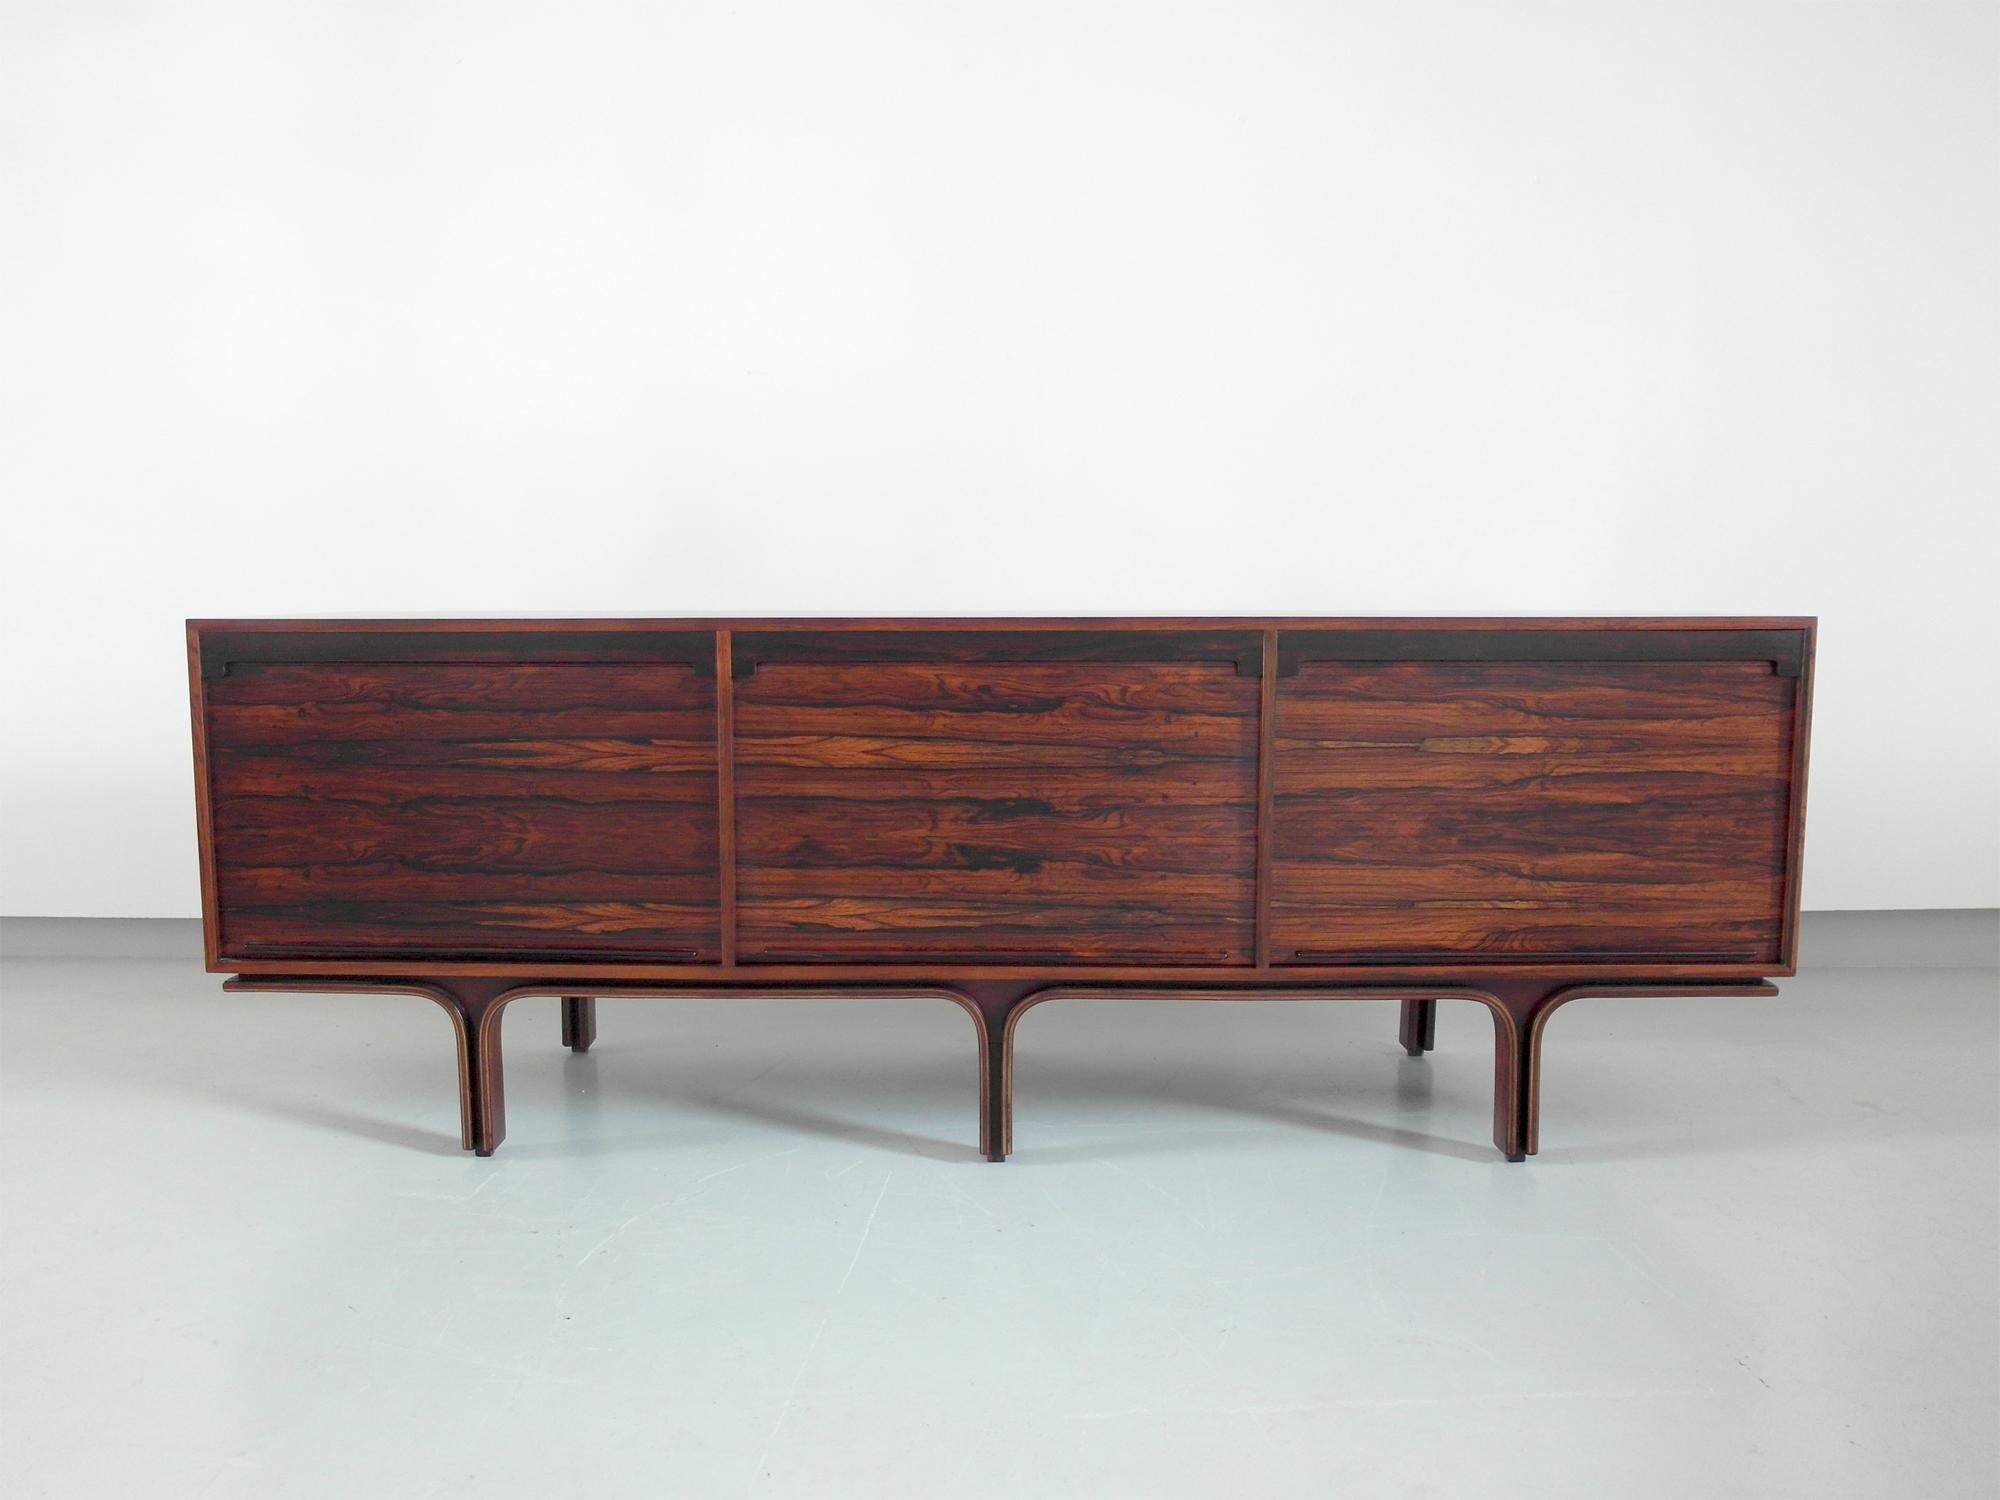 Italian sideboard with tambour doors designed by Gianfranco Frattini for Bernini, Italy, 1957. A beautifully designed Mid-Century Modern sideboard with three vertical tambour doors. The sideboard is executed in a magnificent flamed and grained wood